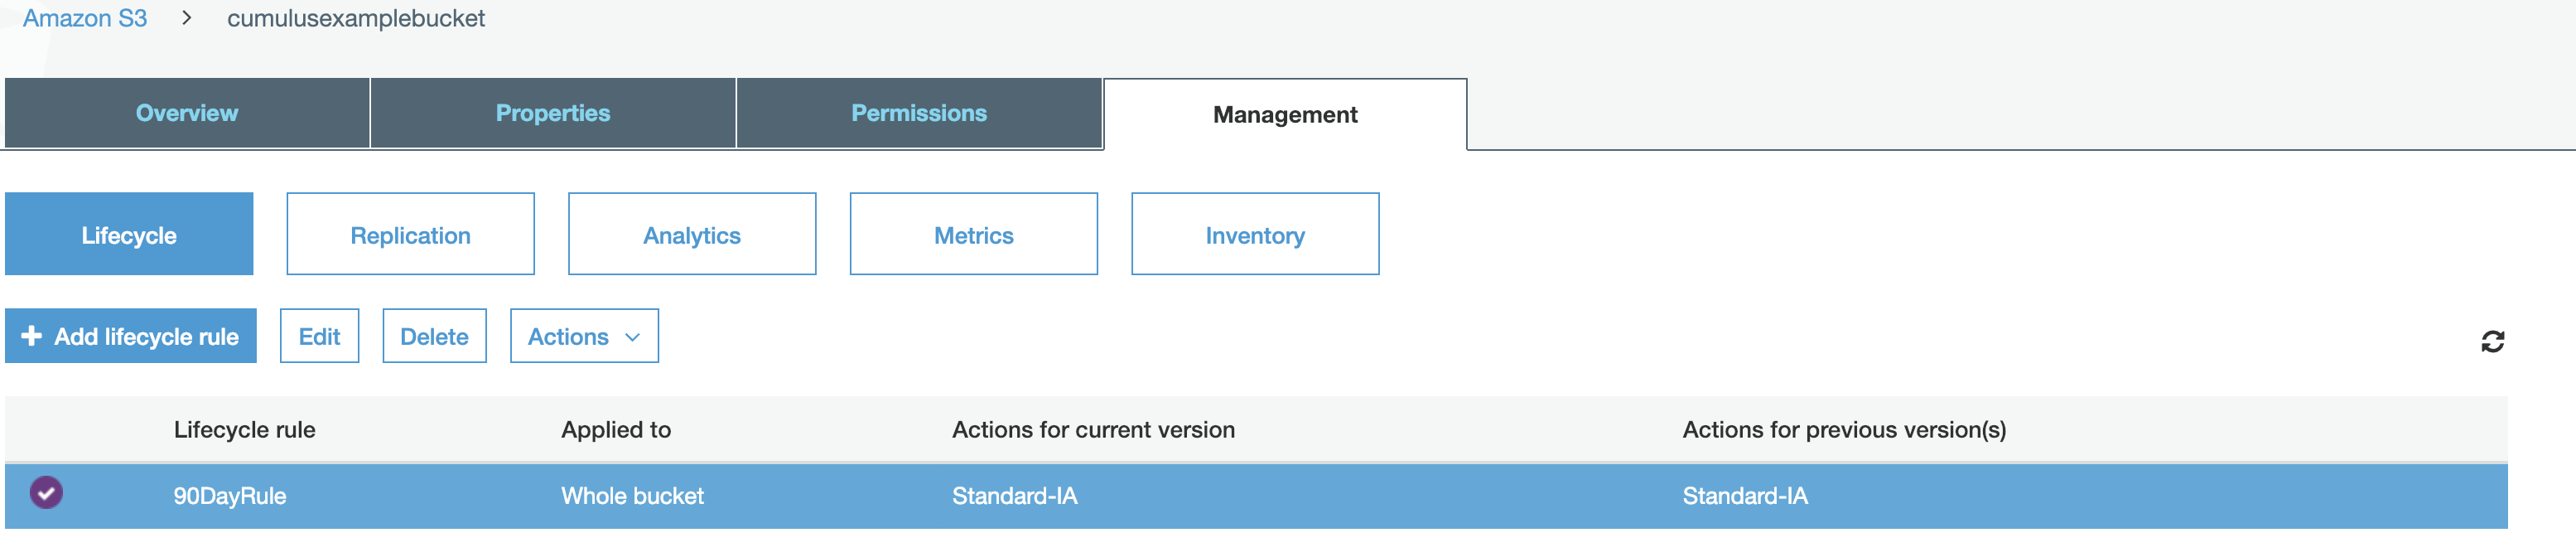 Screenshot of lifecycle rule appearing in the &quot;Management&quot; tab of AWS console for an S3 bucket